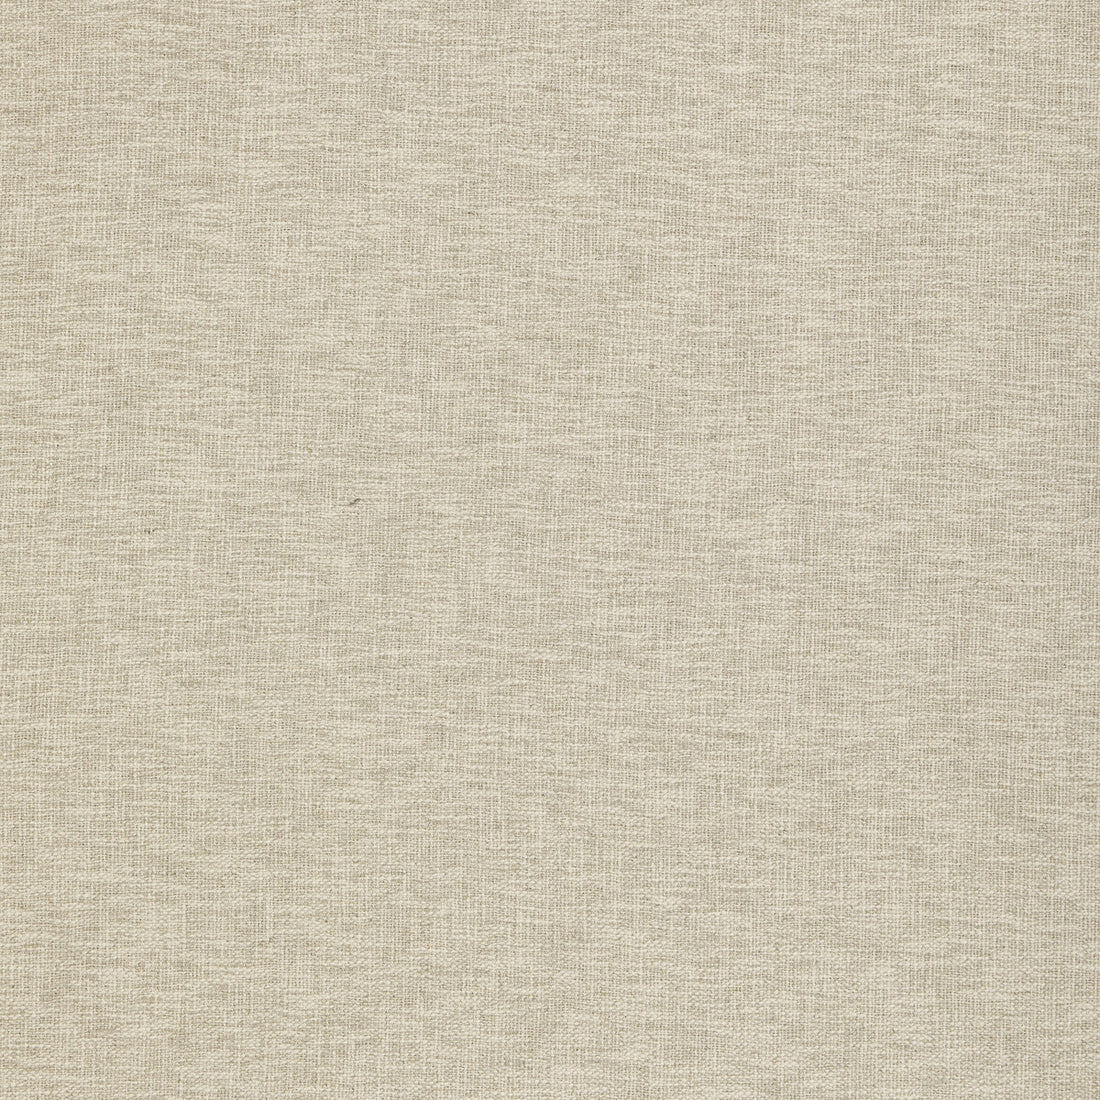 Tufa fabric in parchment color - pattern ED85396.225.0 - by Threads in the Quintessential Naturals collection